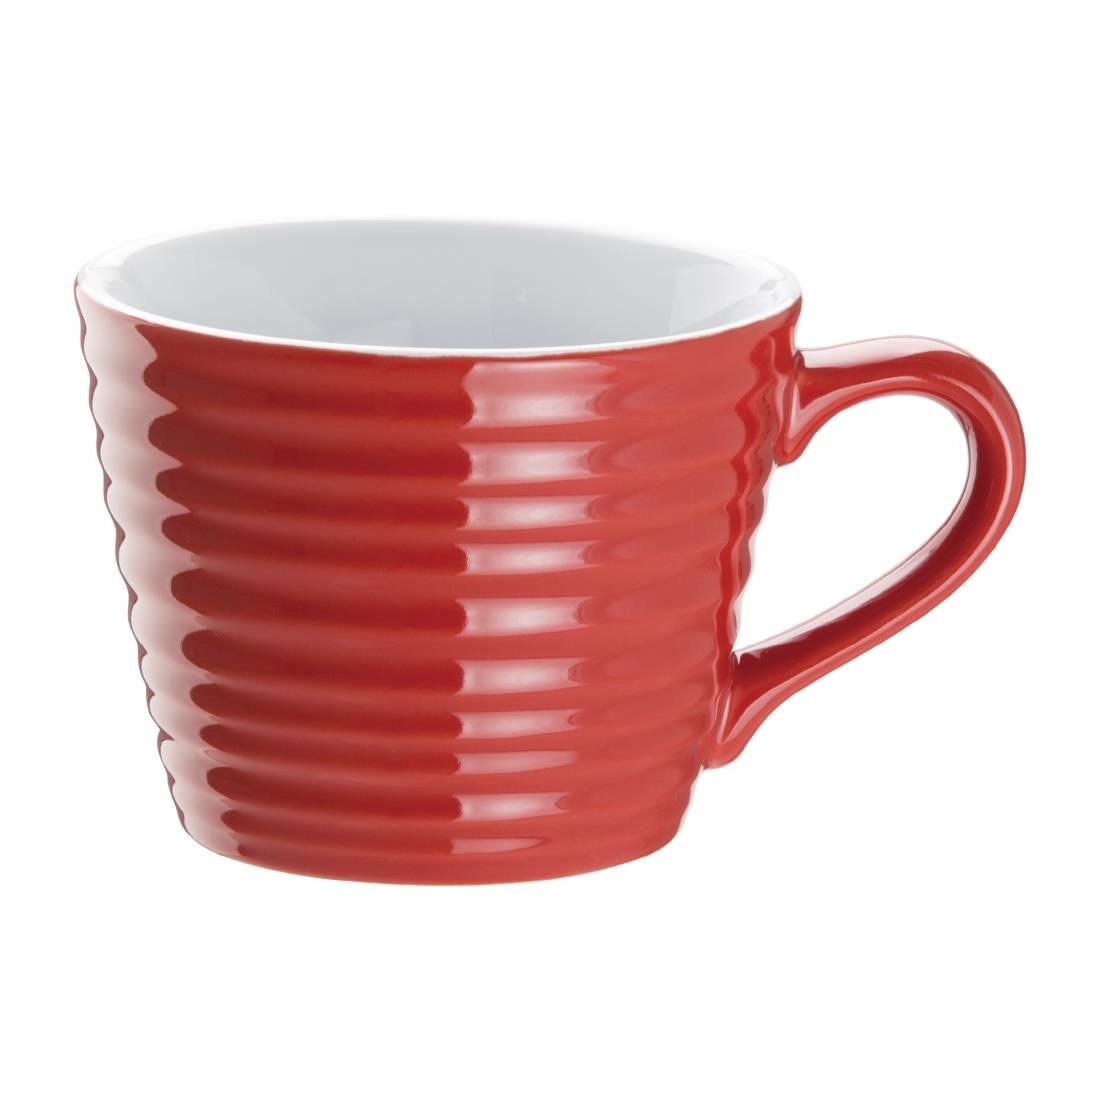 DH637 Olympia CafÃƒÂ© Aroma Mugs Red 230ml (Pack of 6)